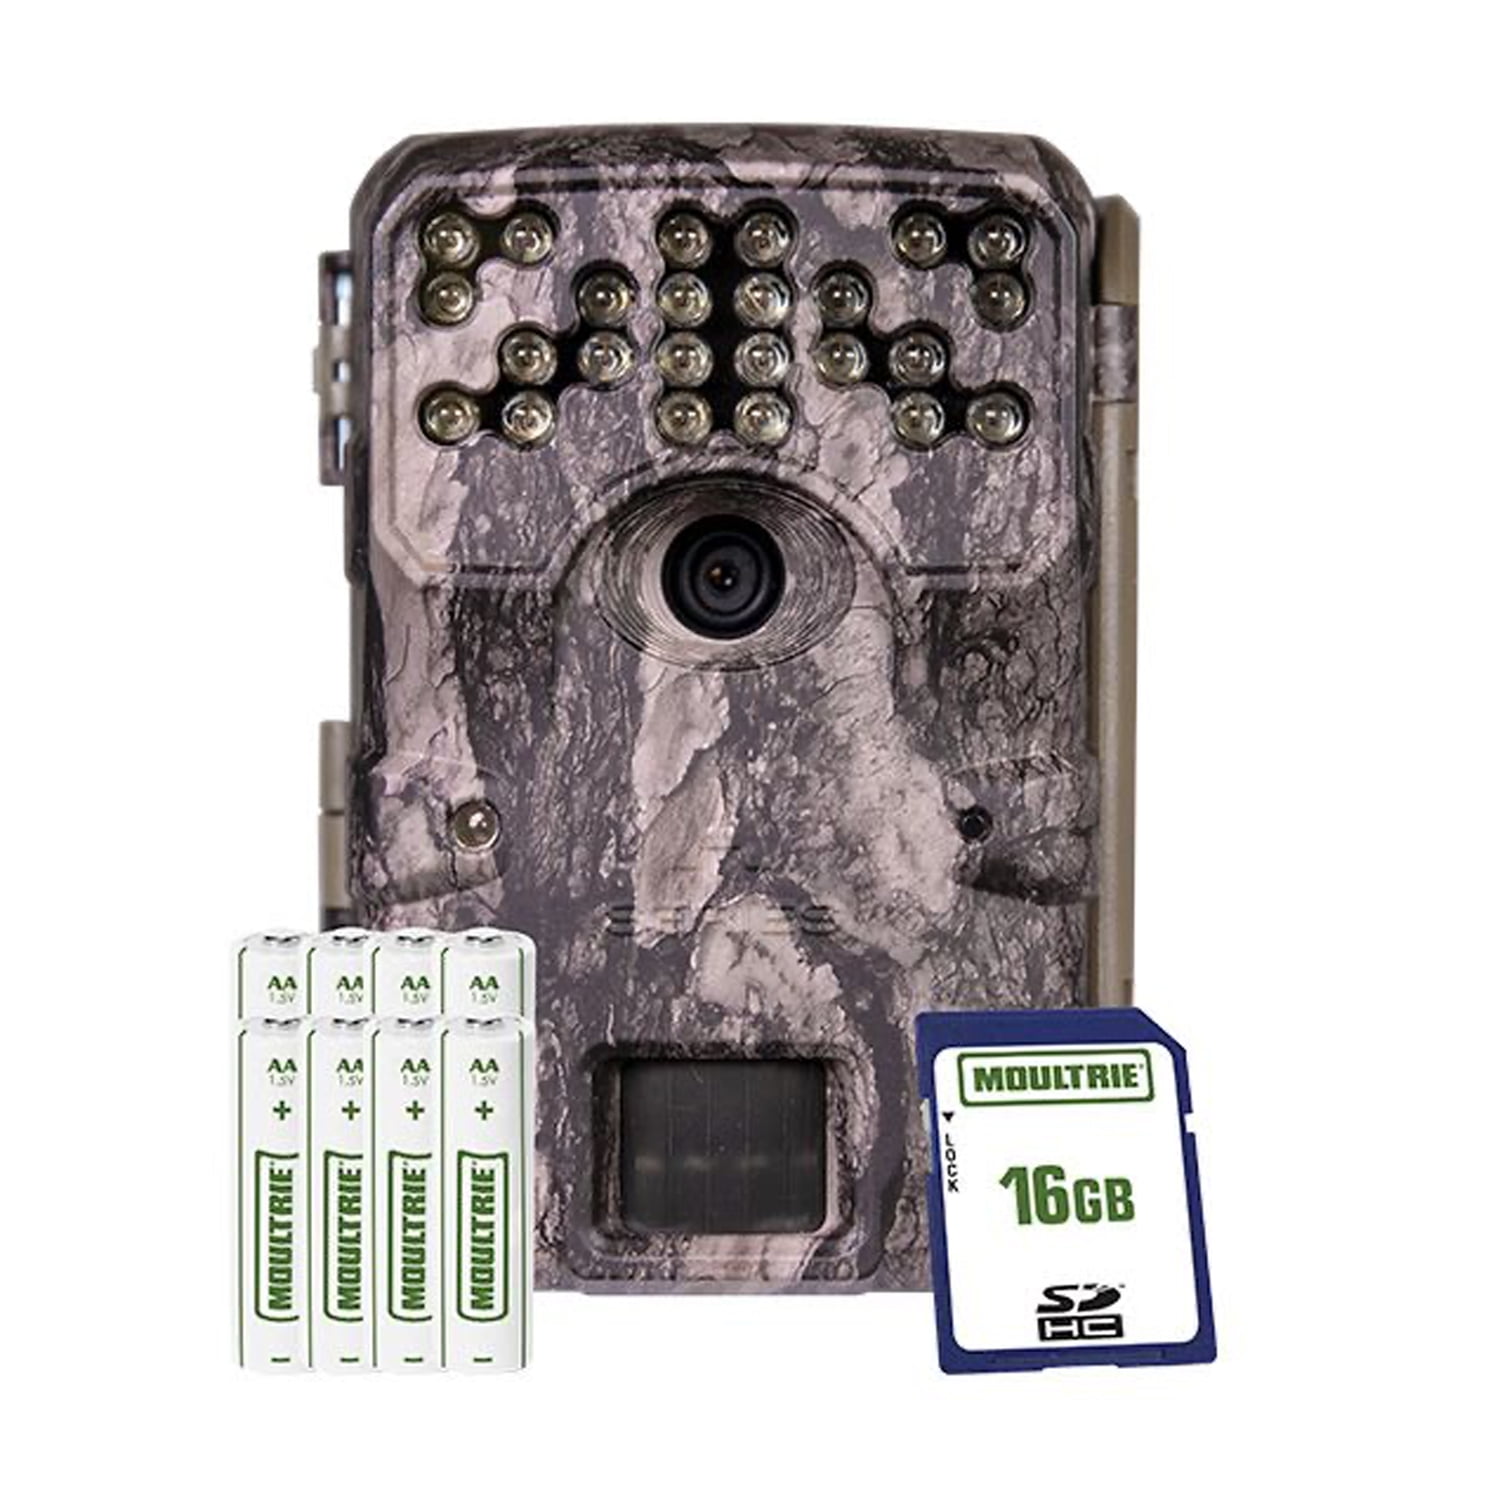 Moultrie Mobile Cellular Verizon 4G LTE Integrated Game Trail Camera WV-6000 New 